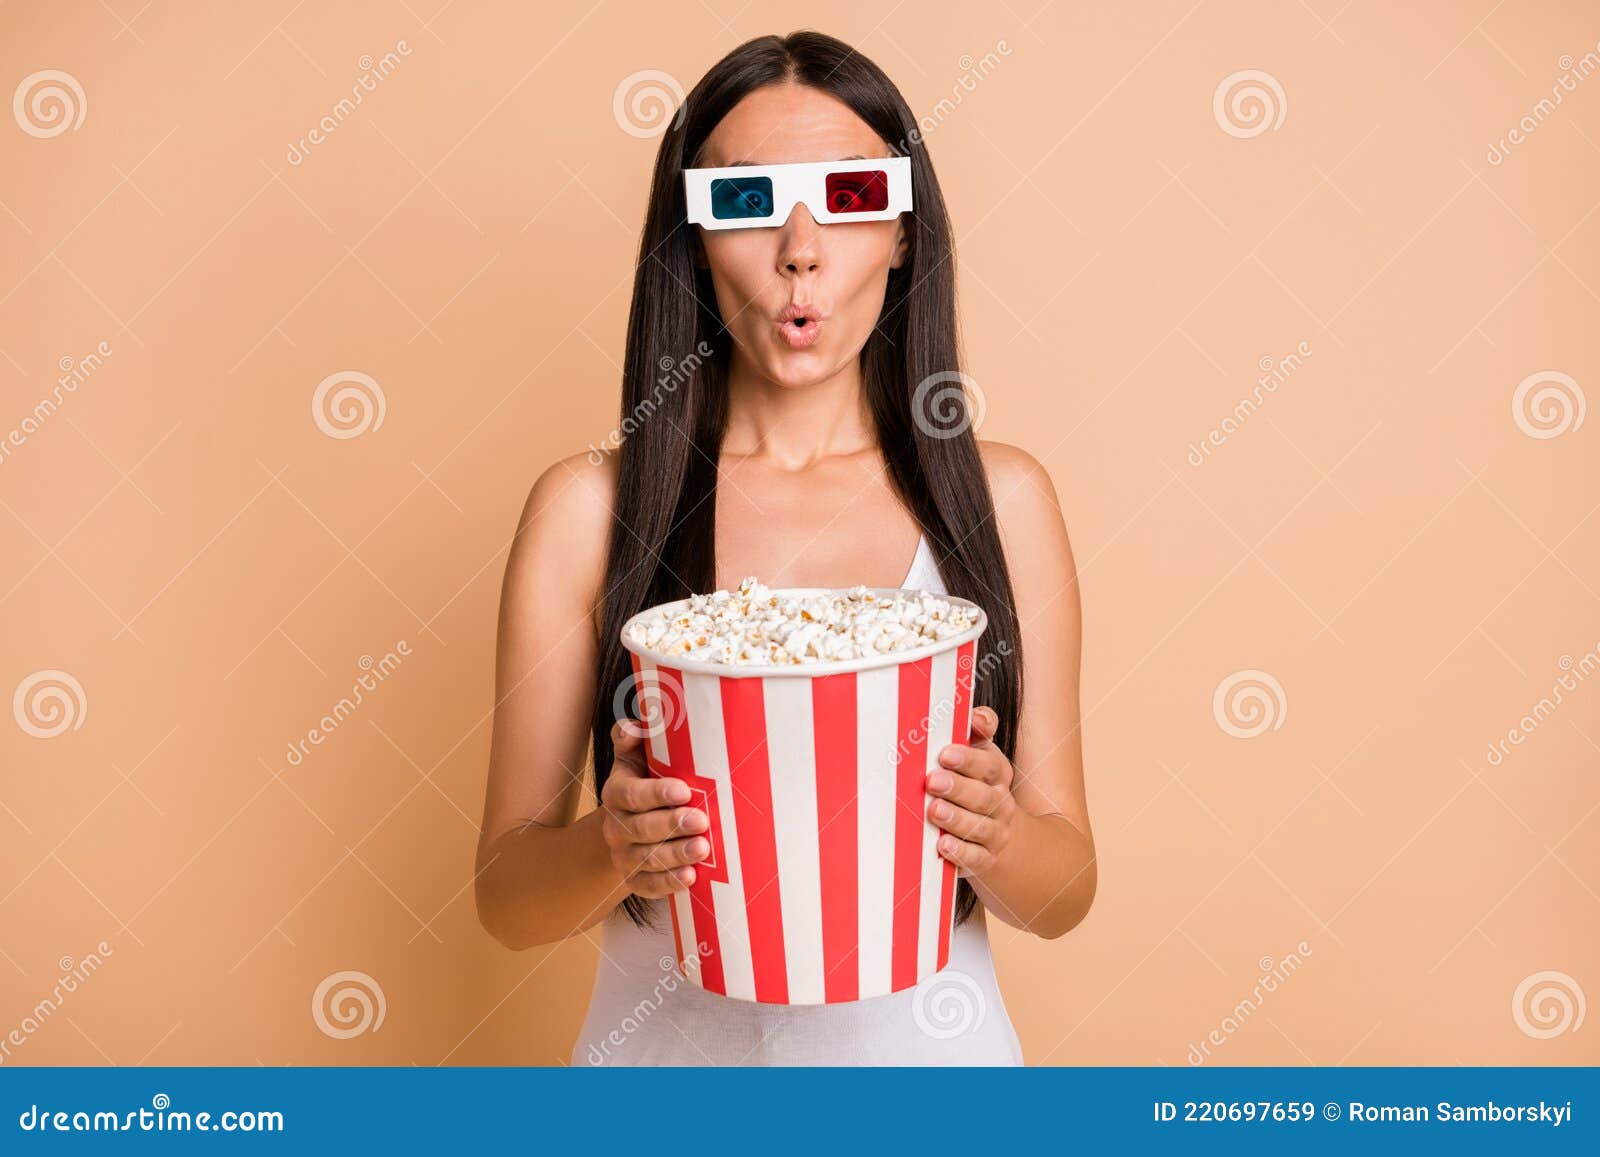 Woman with big thighs holding a larg bag of popcorn Stock Photo